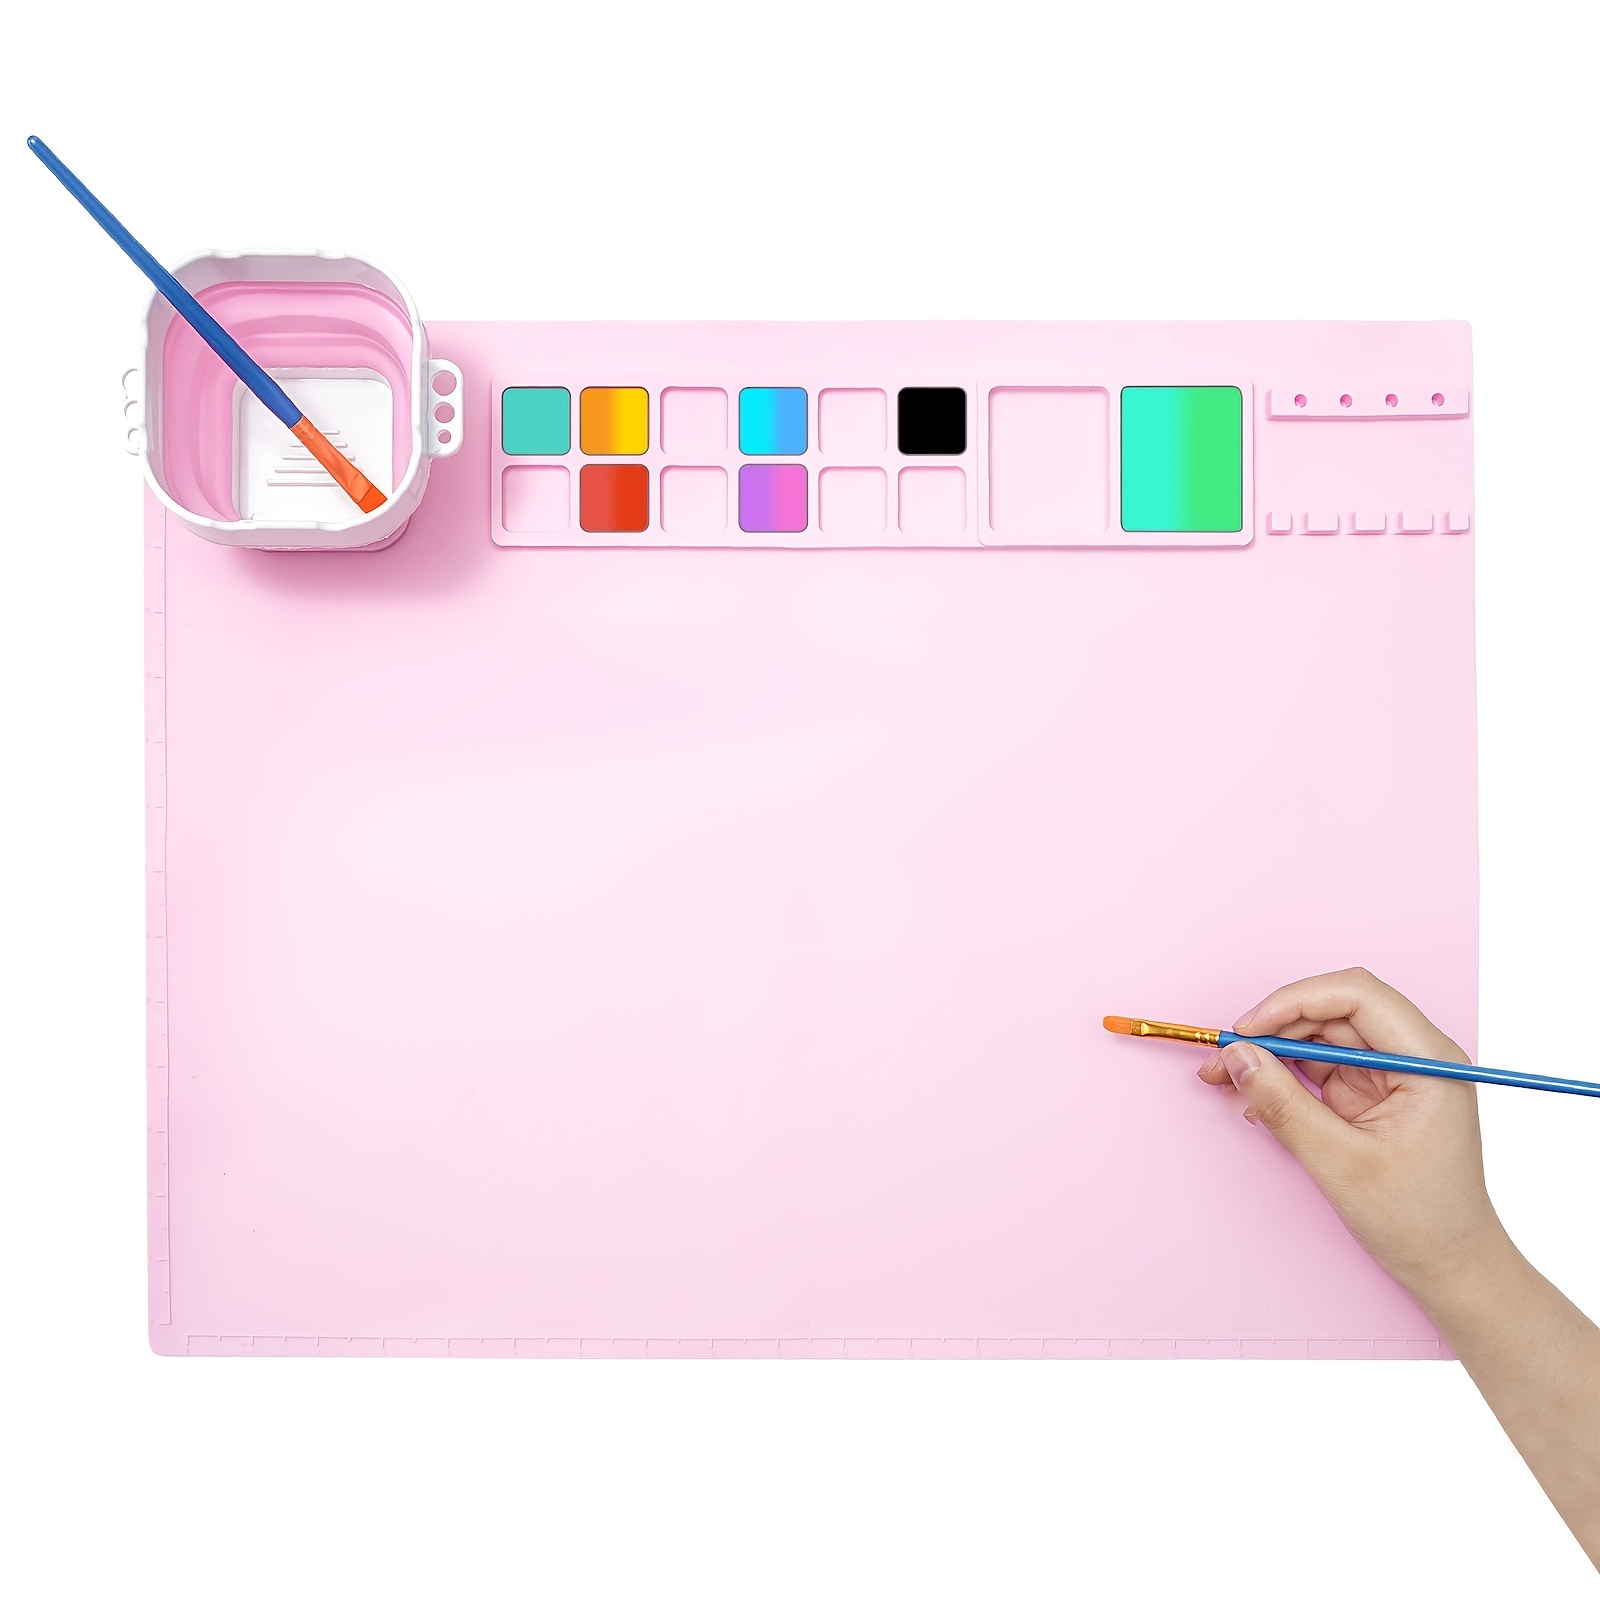 Silicone Painting Mat With Cup And Color Palette - Brilliant